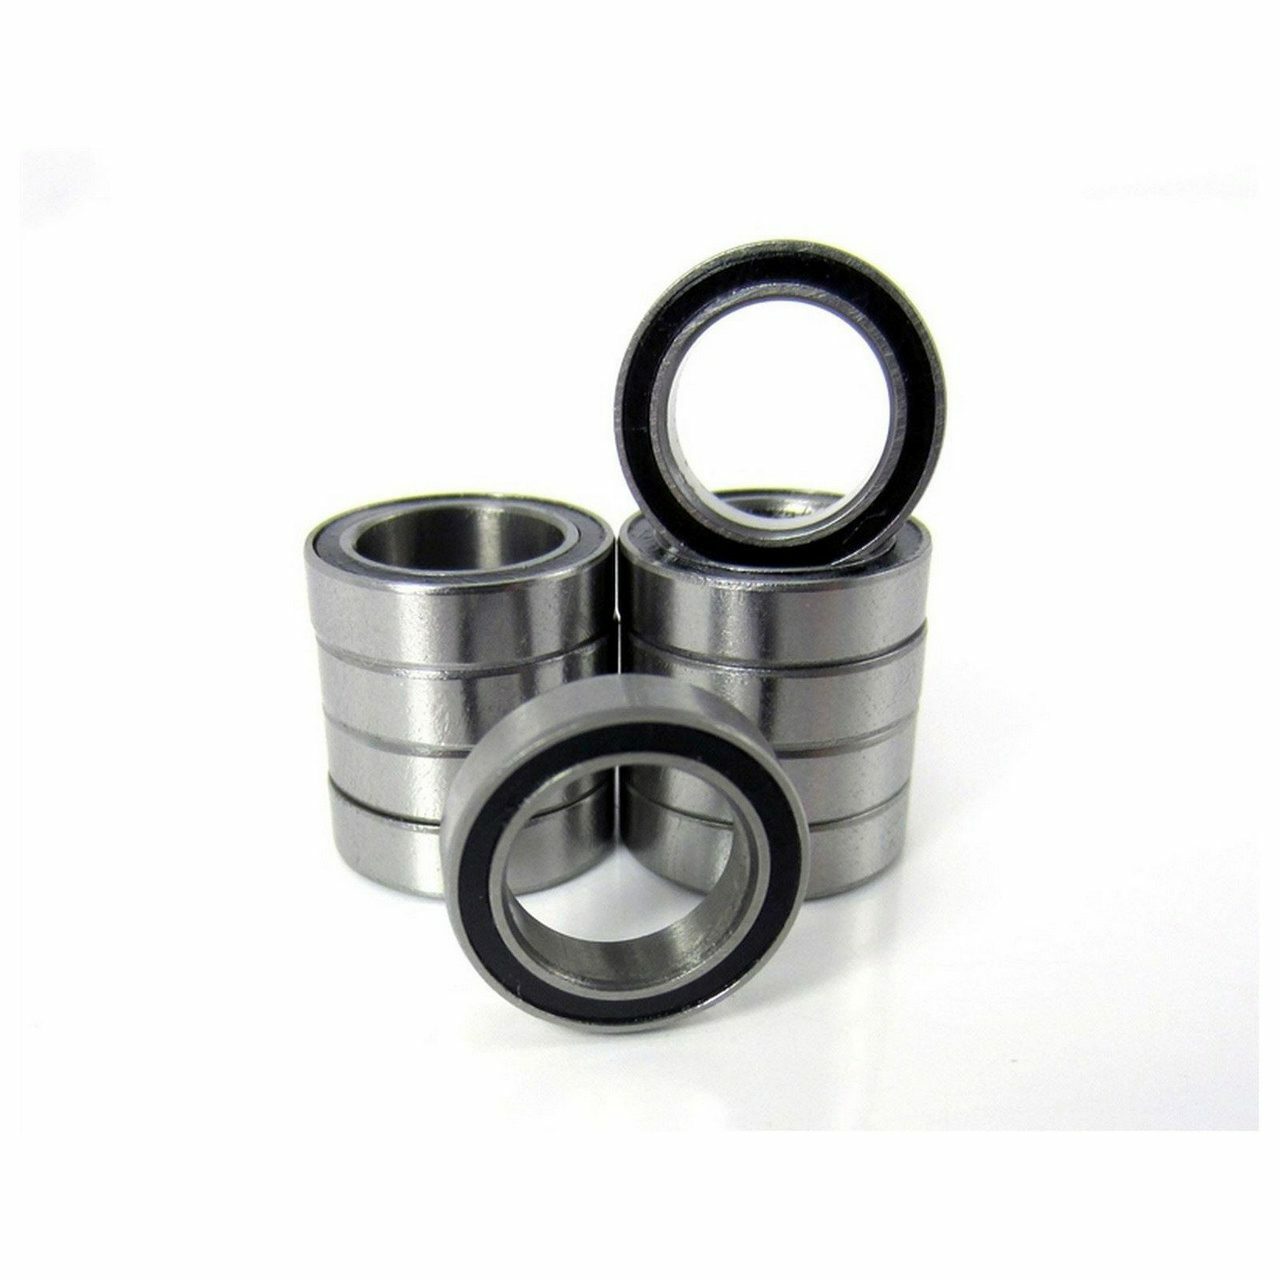 6700-2RS 10x15x4mm Precision High Speed RC Car Ball Bearing, Chrome Steel (GCr15) with Black Rubber Seals ABEC-1 ABEC-3 ABEC-5